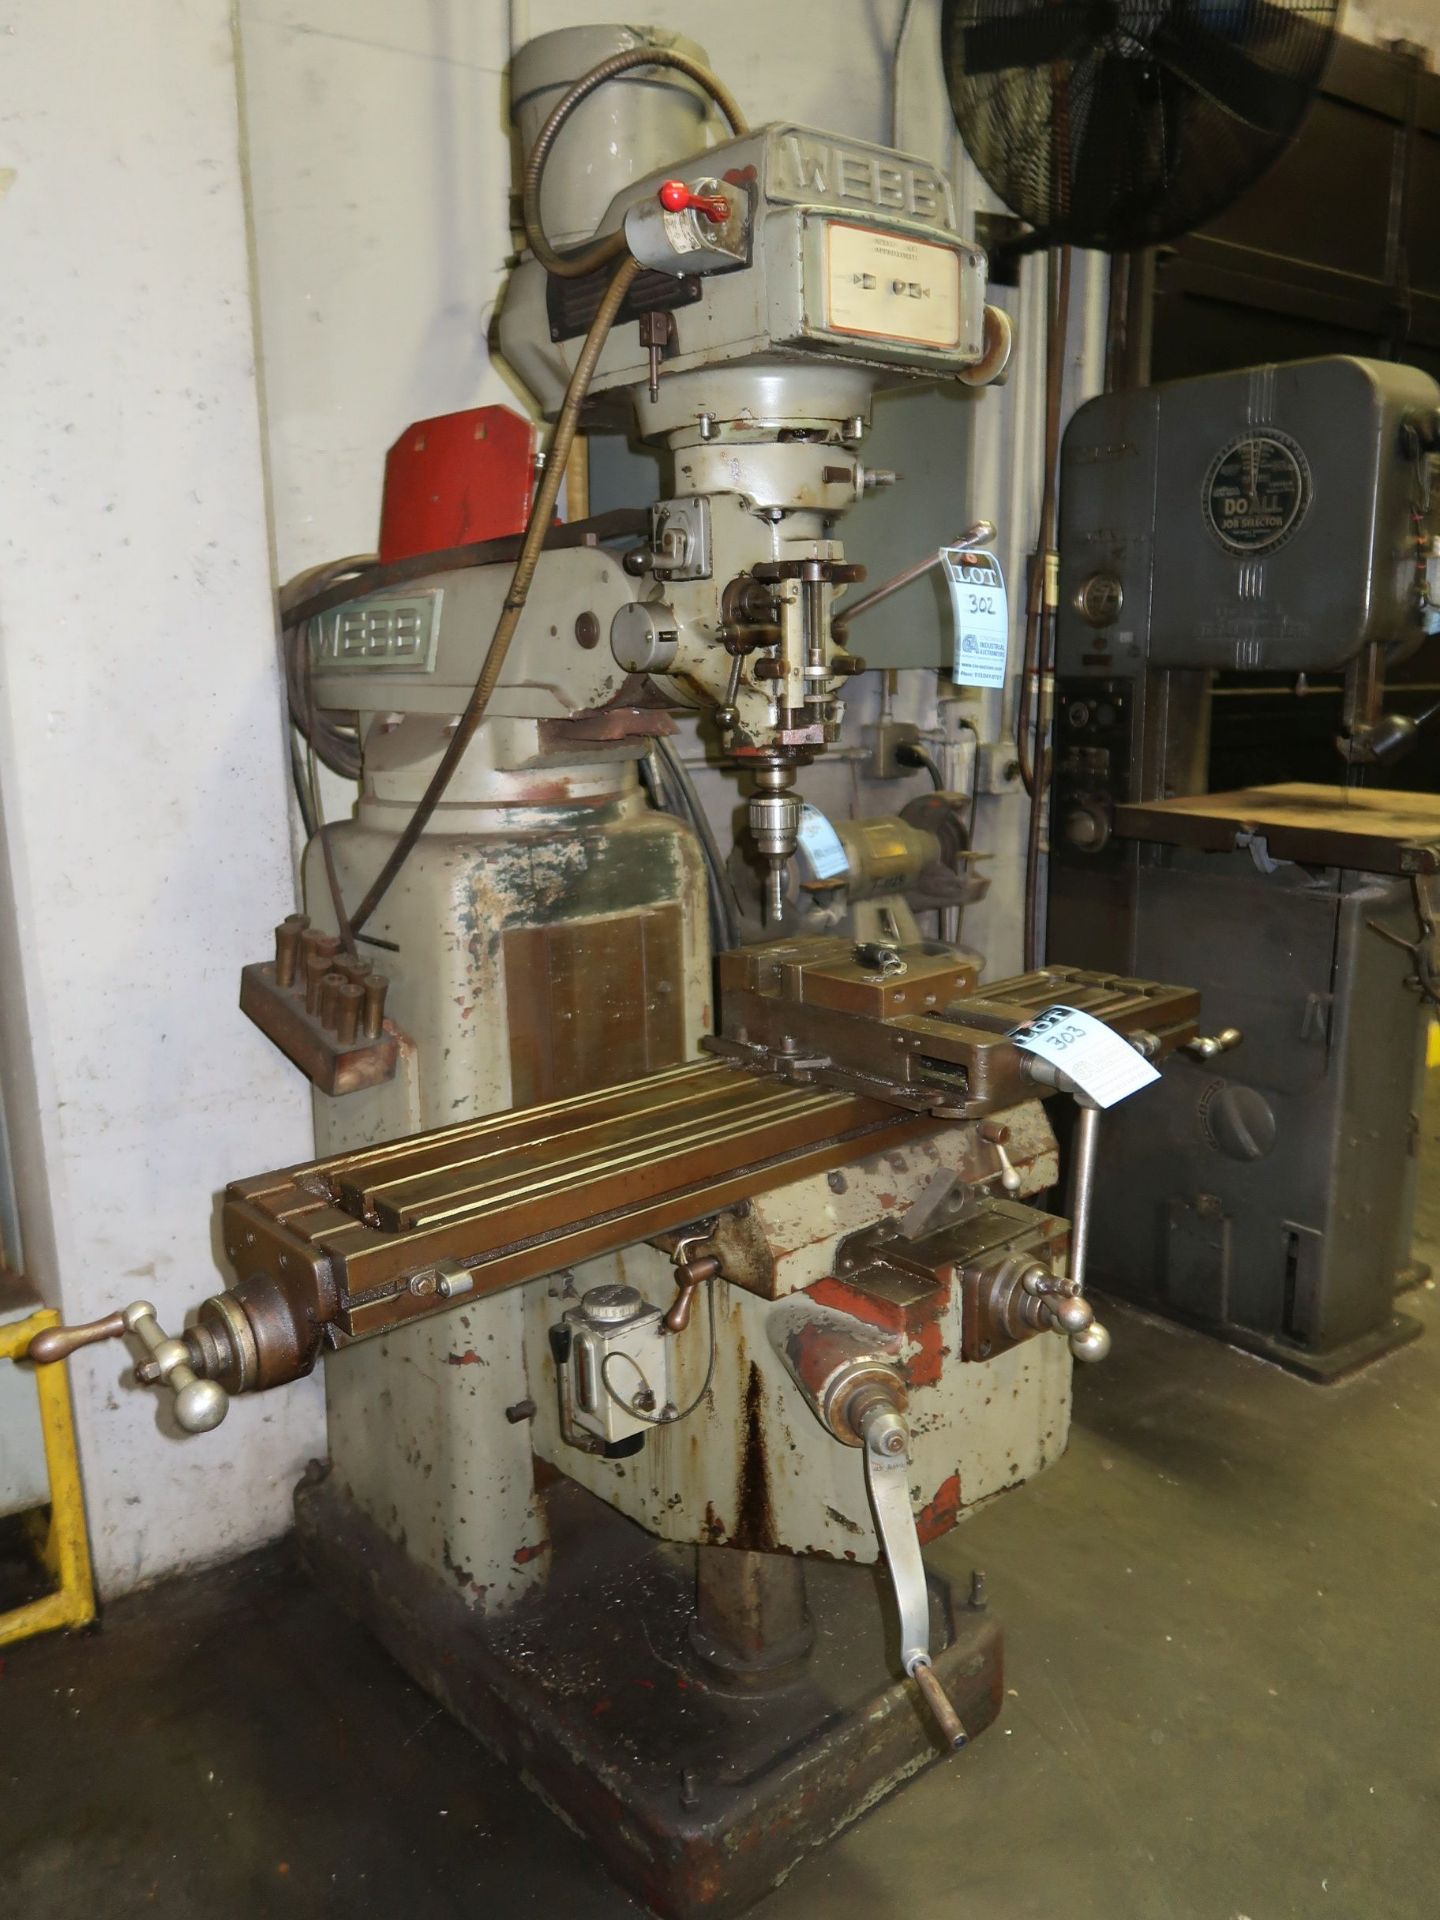 3 HP WEBB VERTICAL MILLING MACHINE; S/N 1855, SPINDLE SPEED 60-4,200 RPM, 9" X 48" TABLE - Image 2 of 6